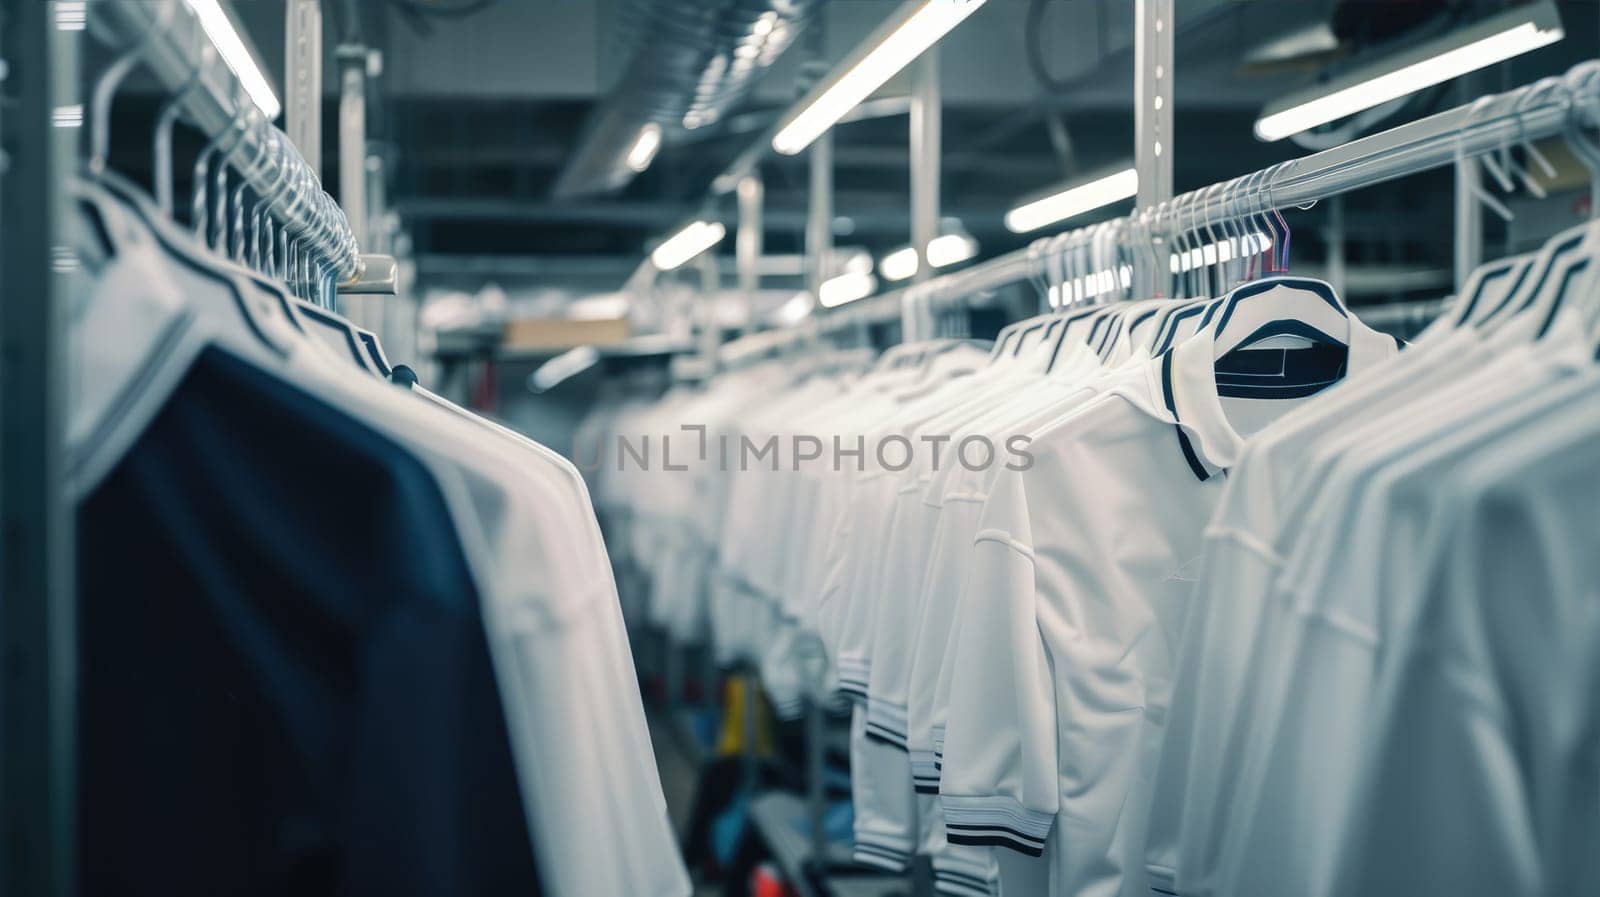 A warehouse filled with lots of clothes including white shirts AI